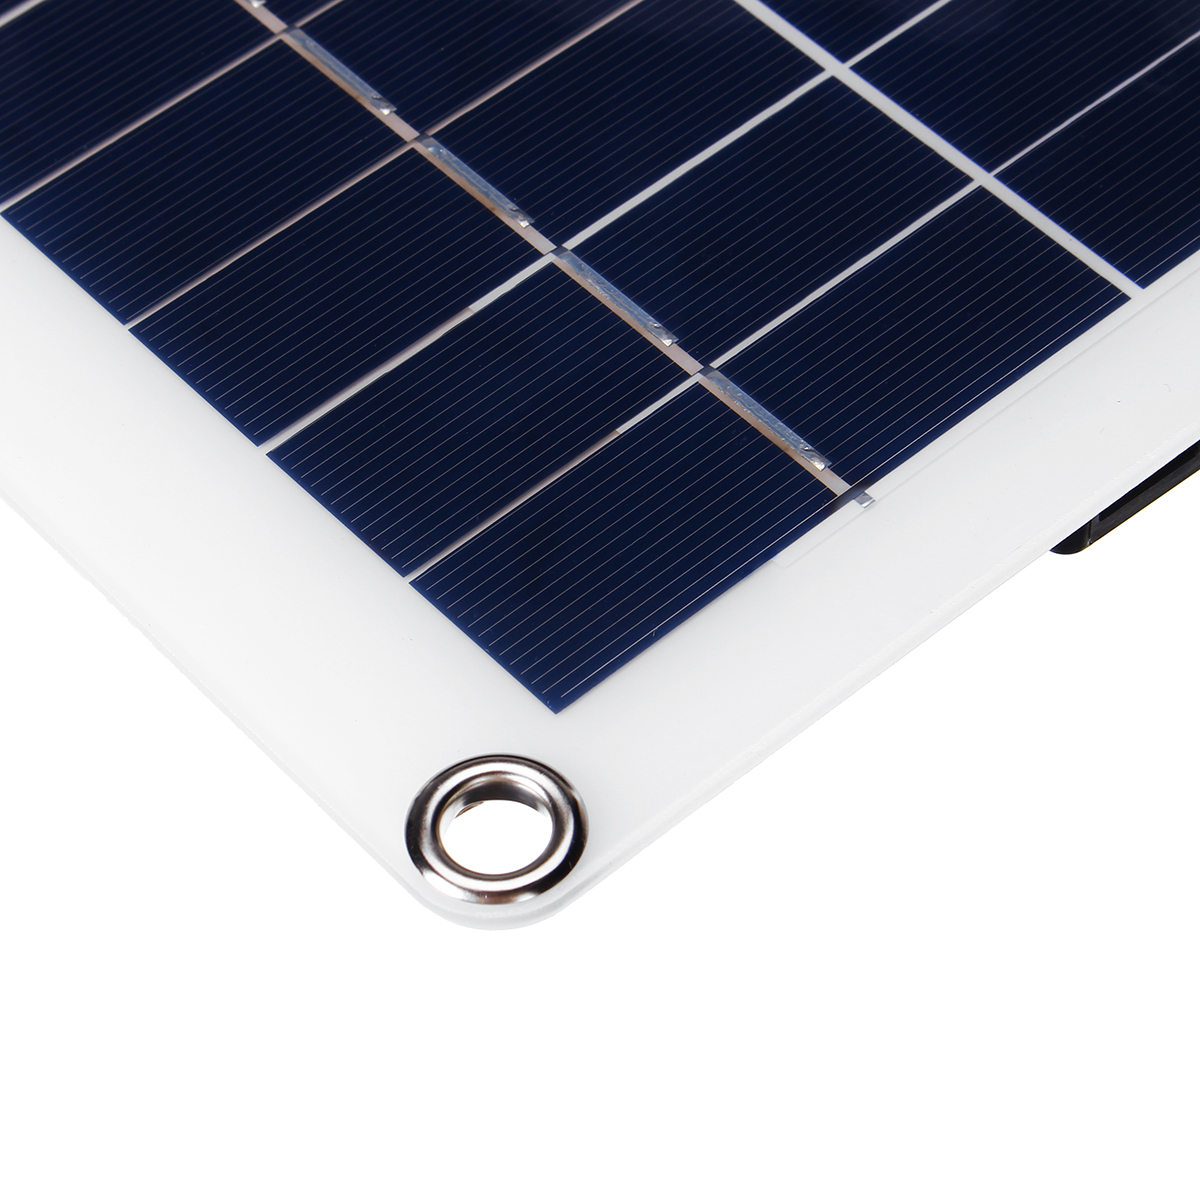 15W 18V 435×200×2.5mm Polysilicon Solar Panel for RV Roof Boat